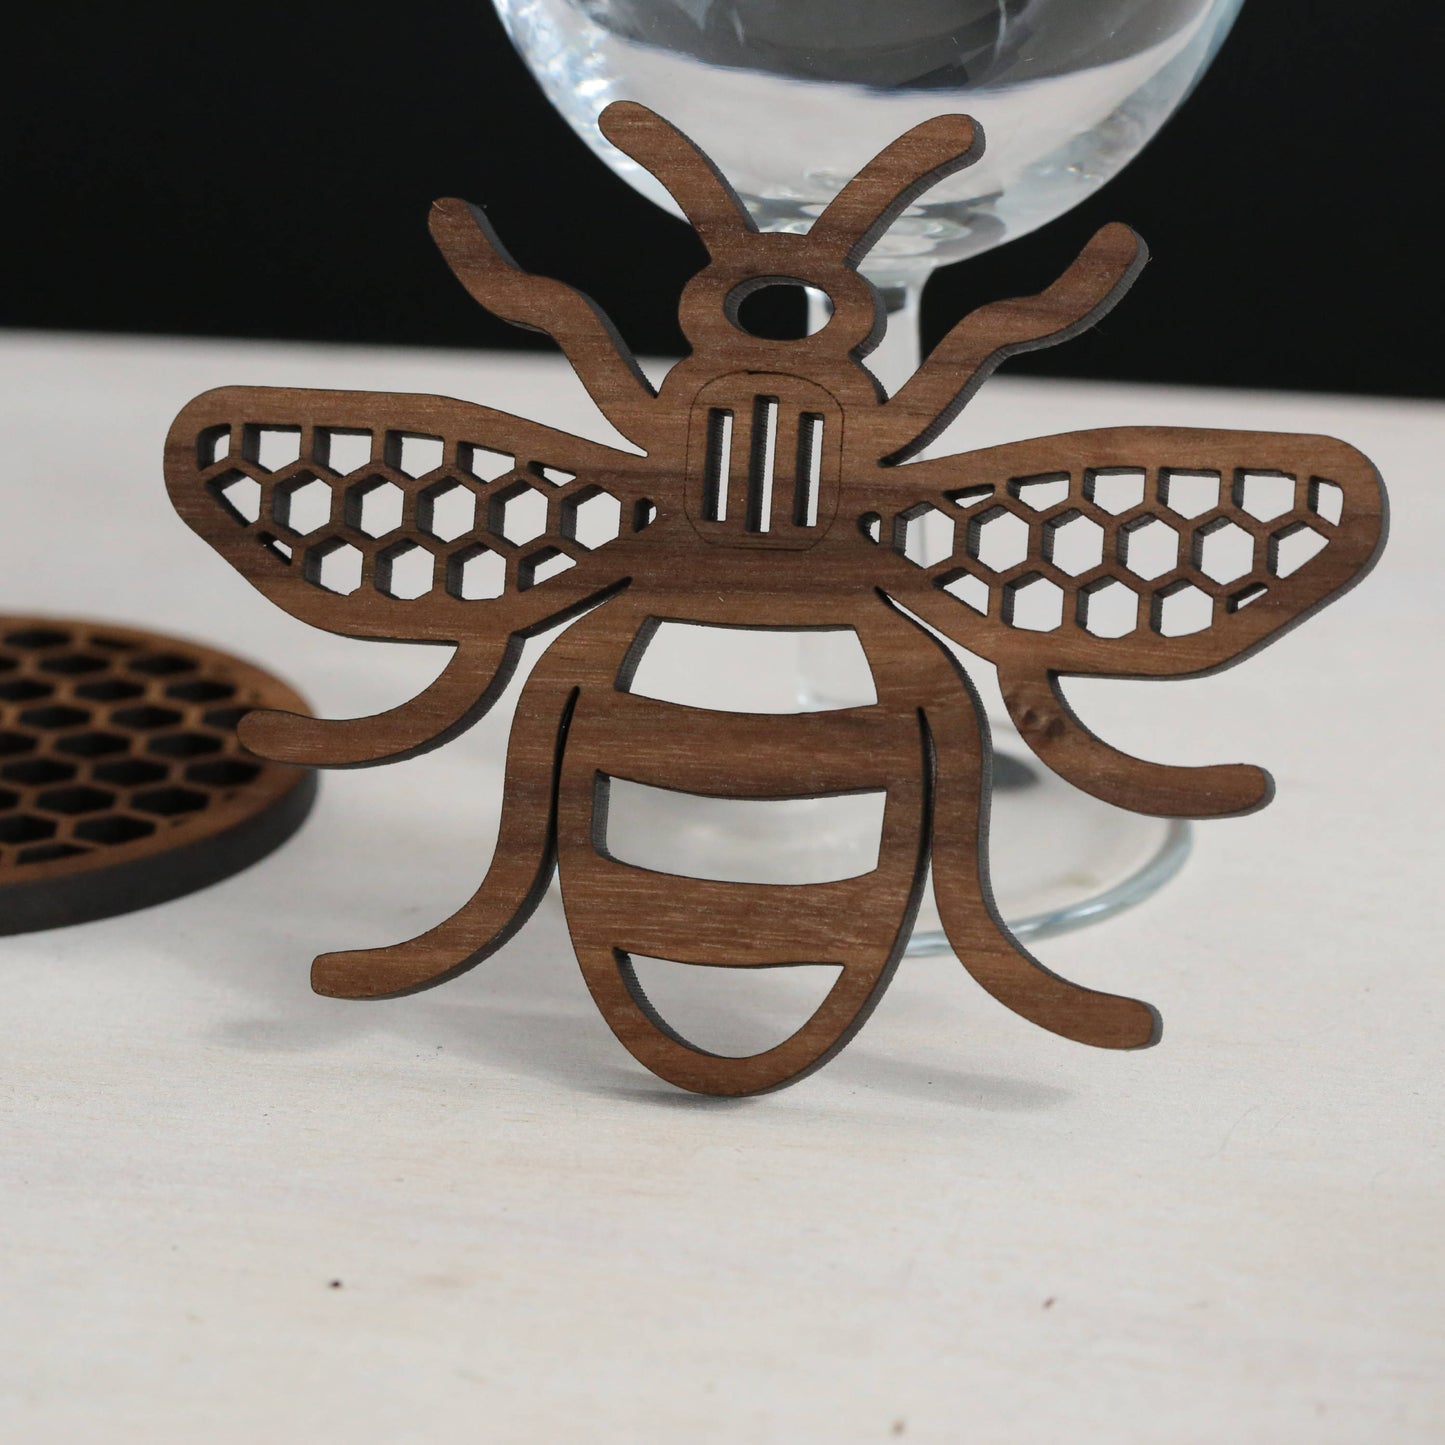 Manchester Bee - real wood coaster - Mancunian - personalised gift